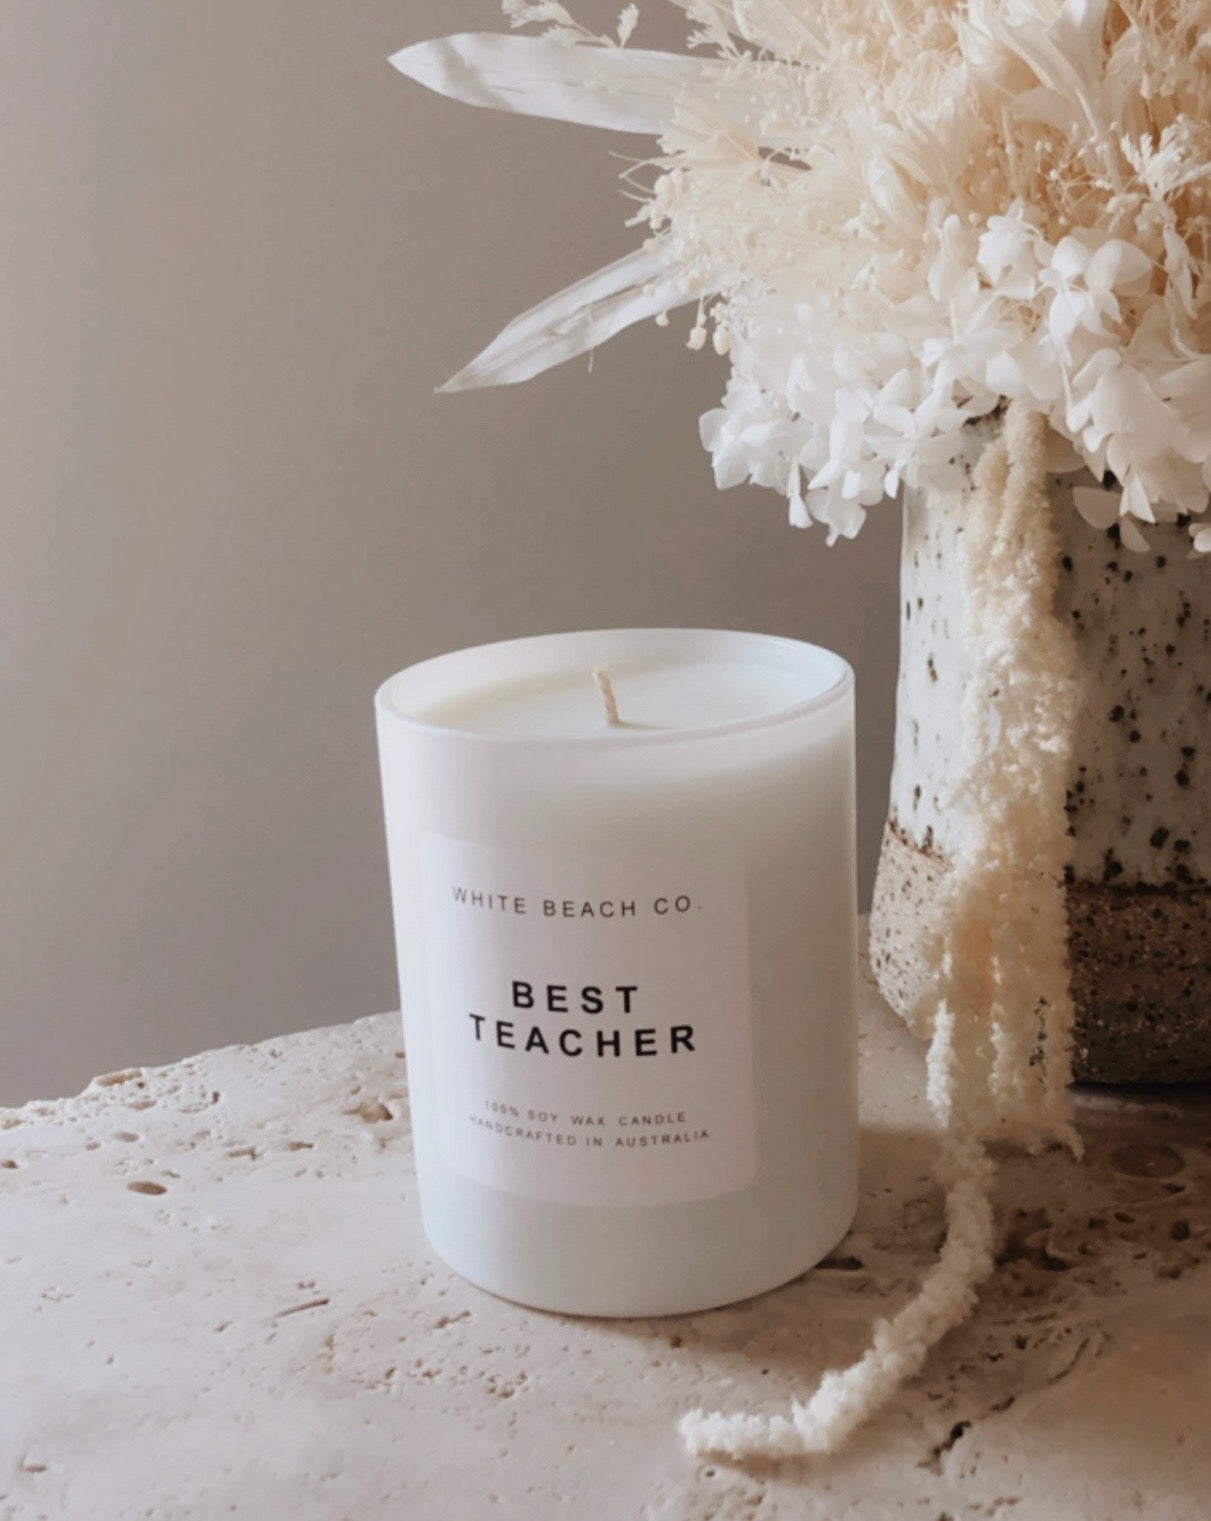 BEST TEACHER gift scented soy candle by White Beach Co.